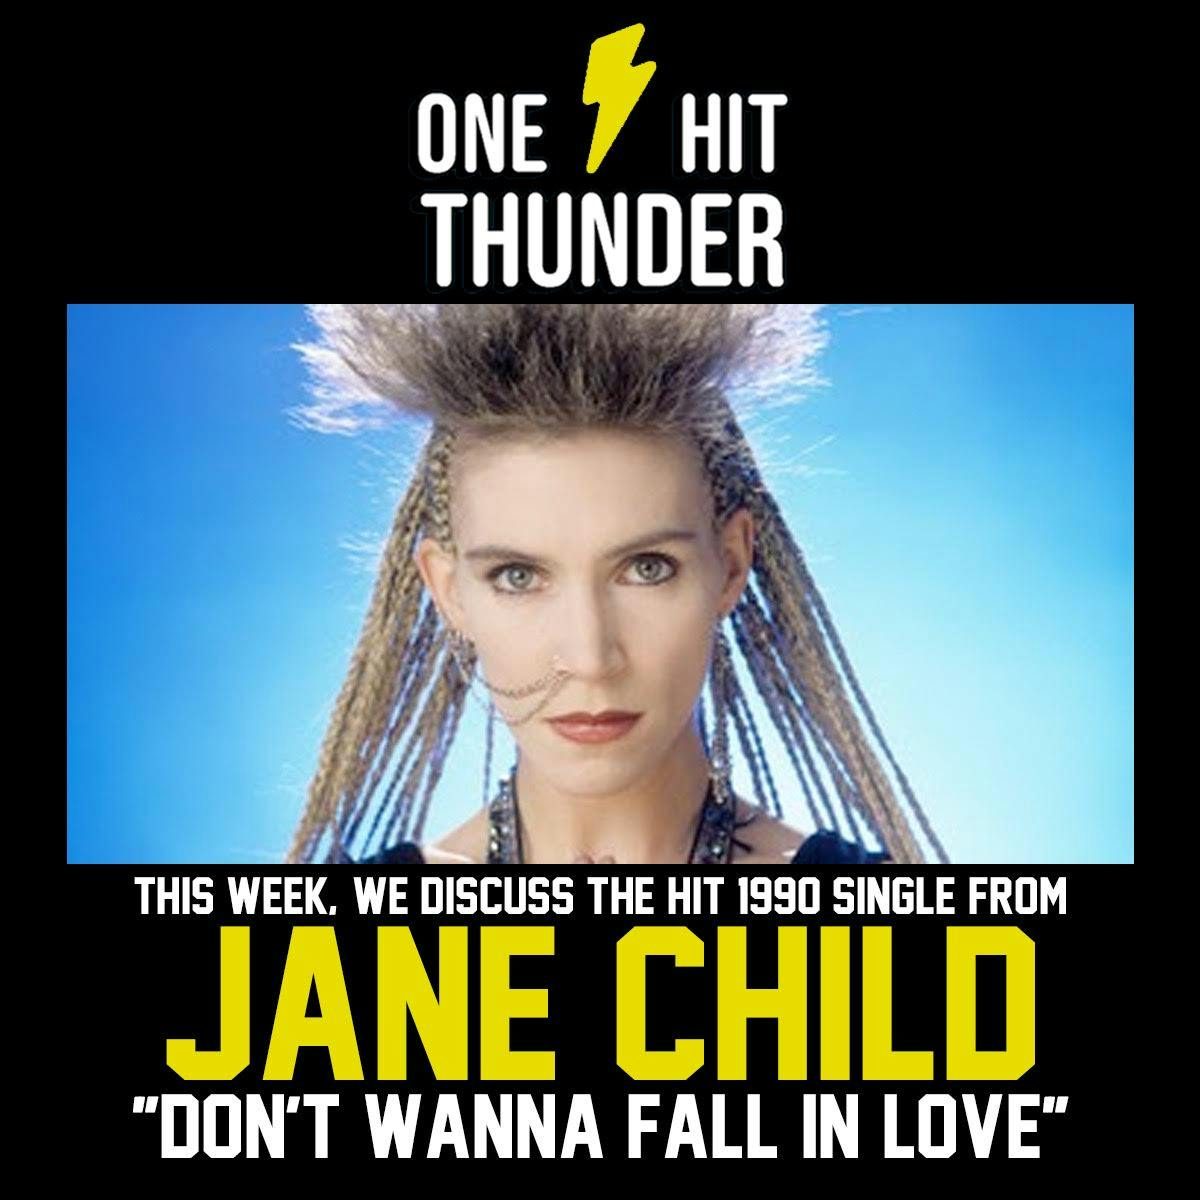 ”Don’t Wanna Fall in Love” by Jane Child